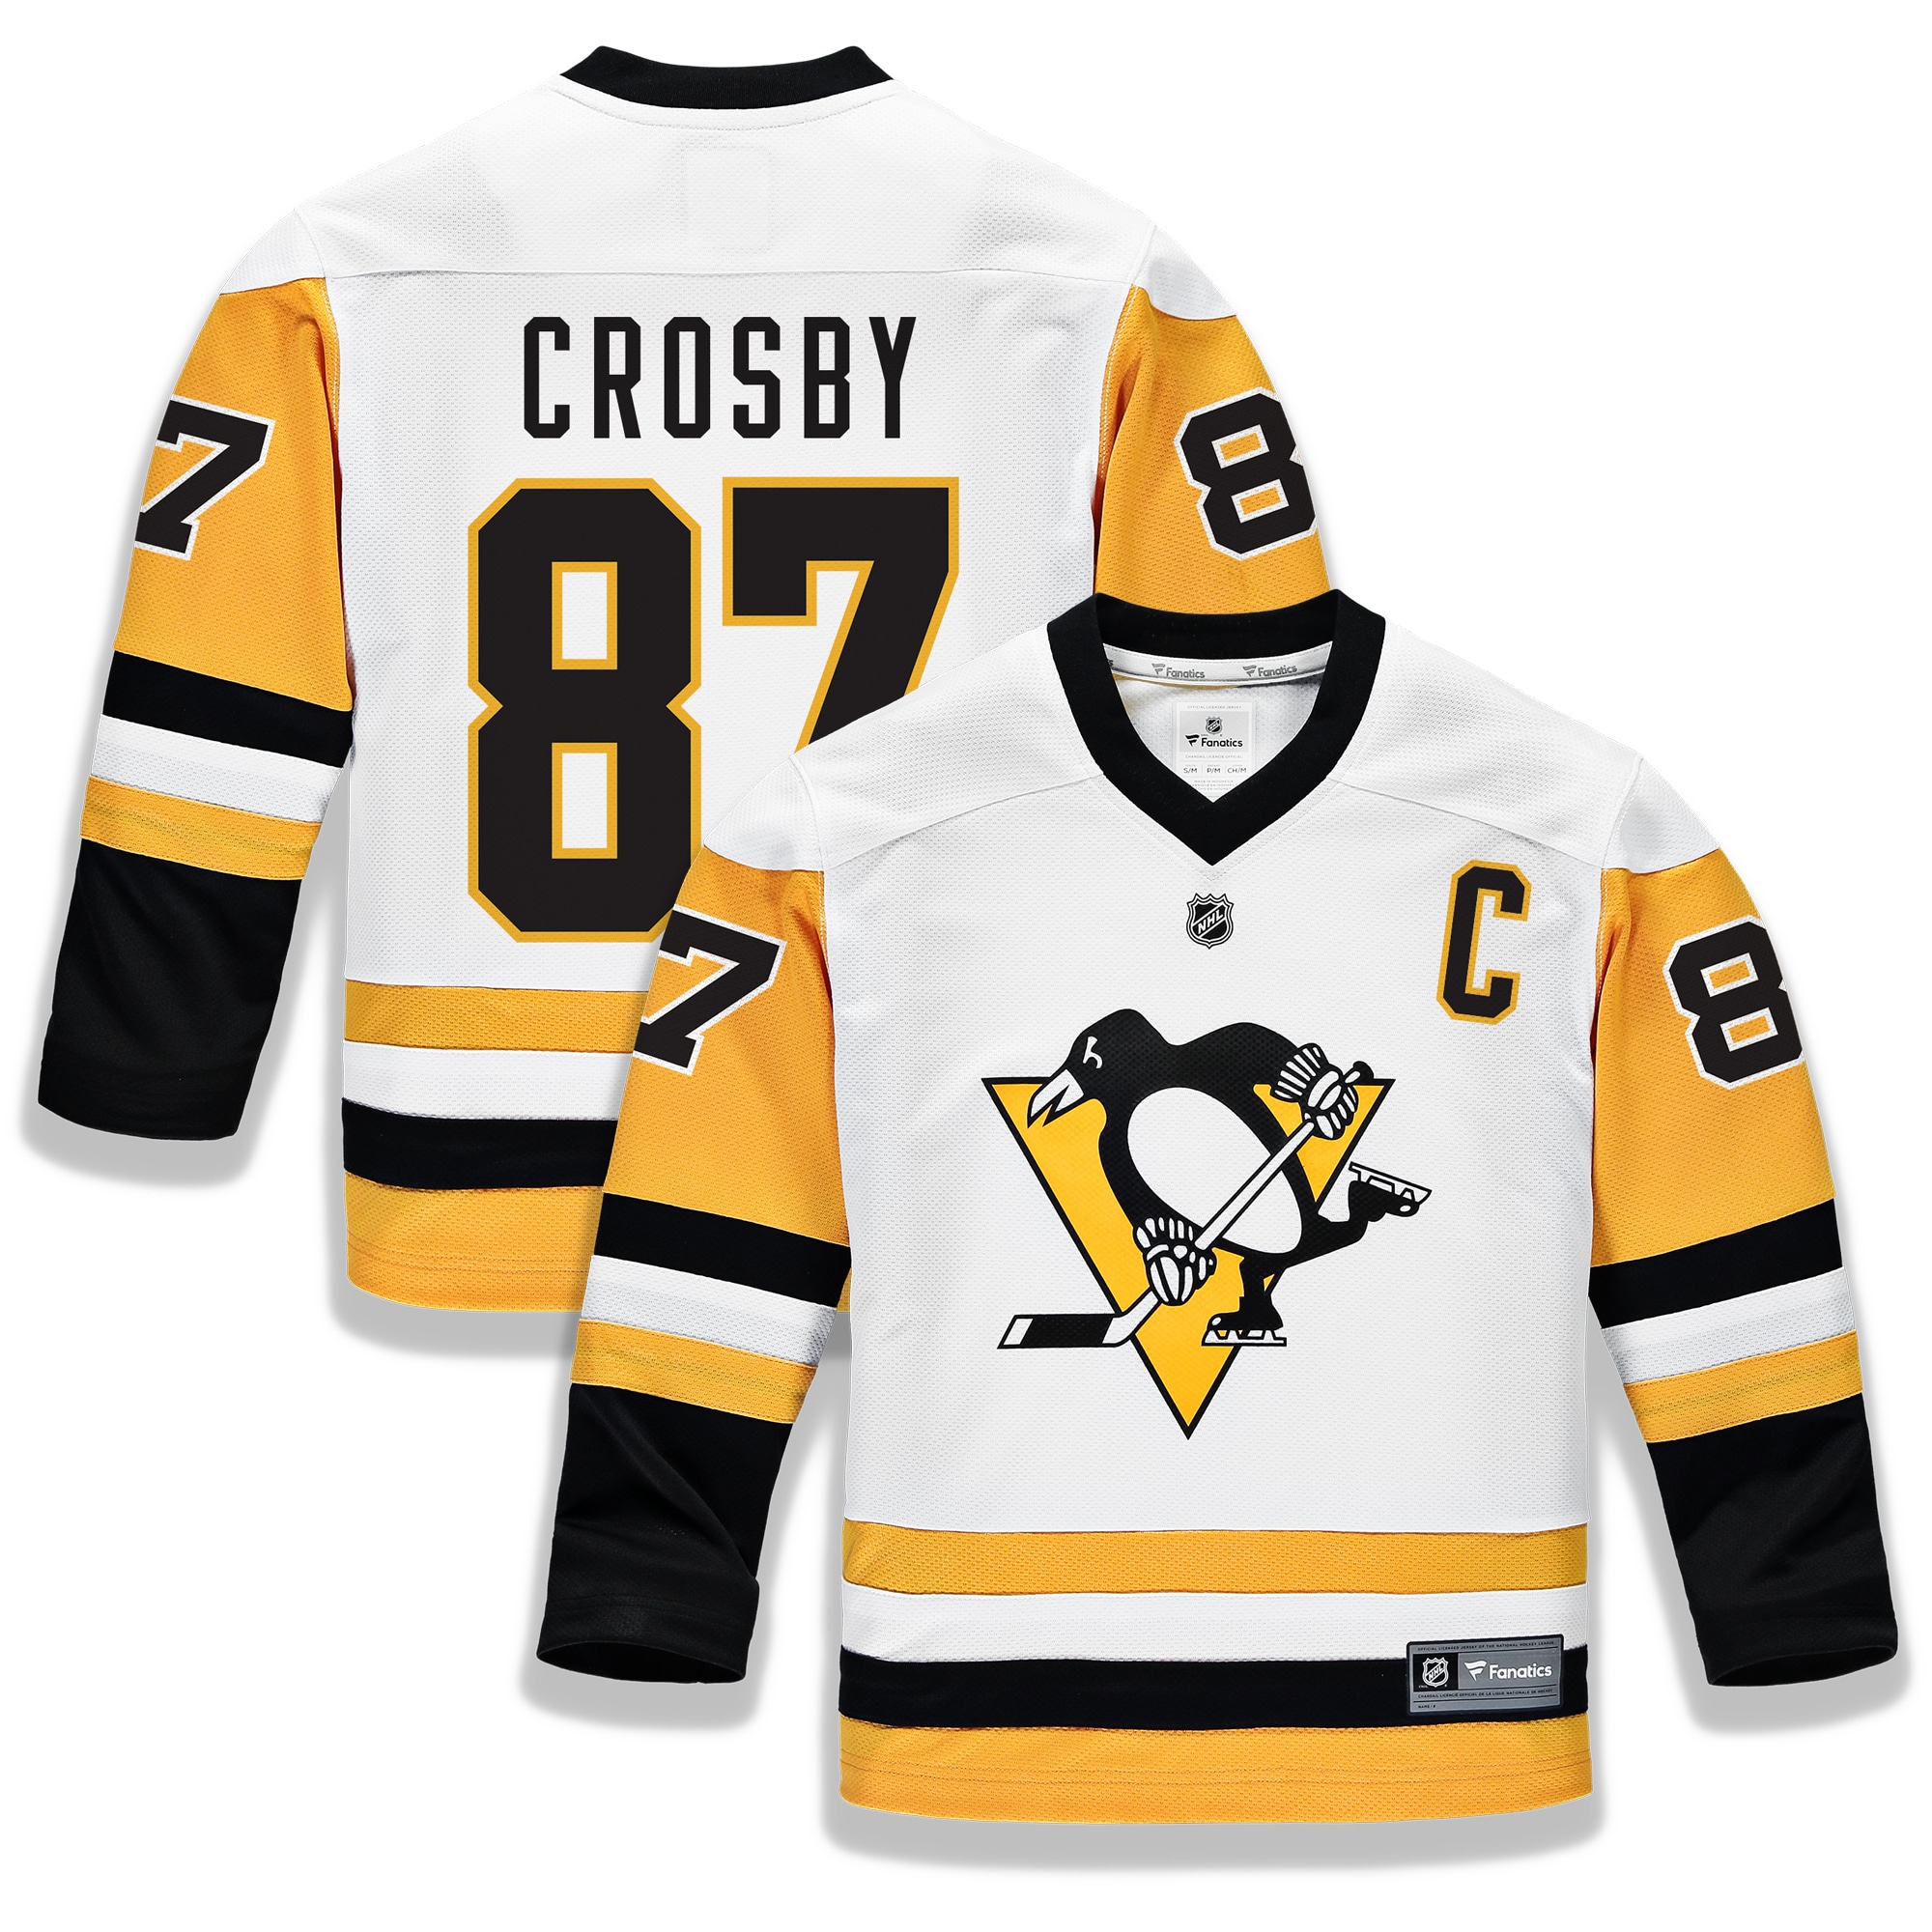 white pittsburgh penguins jersey